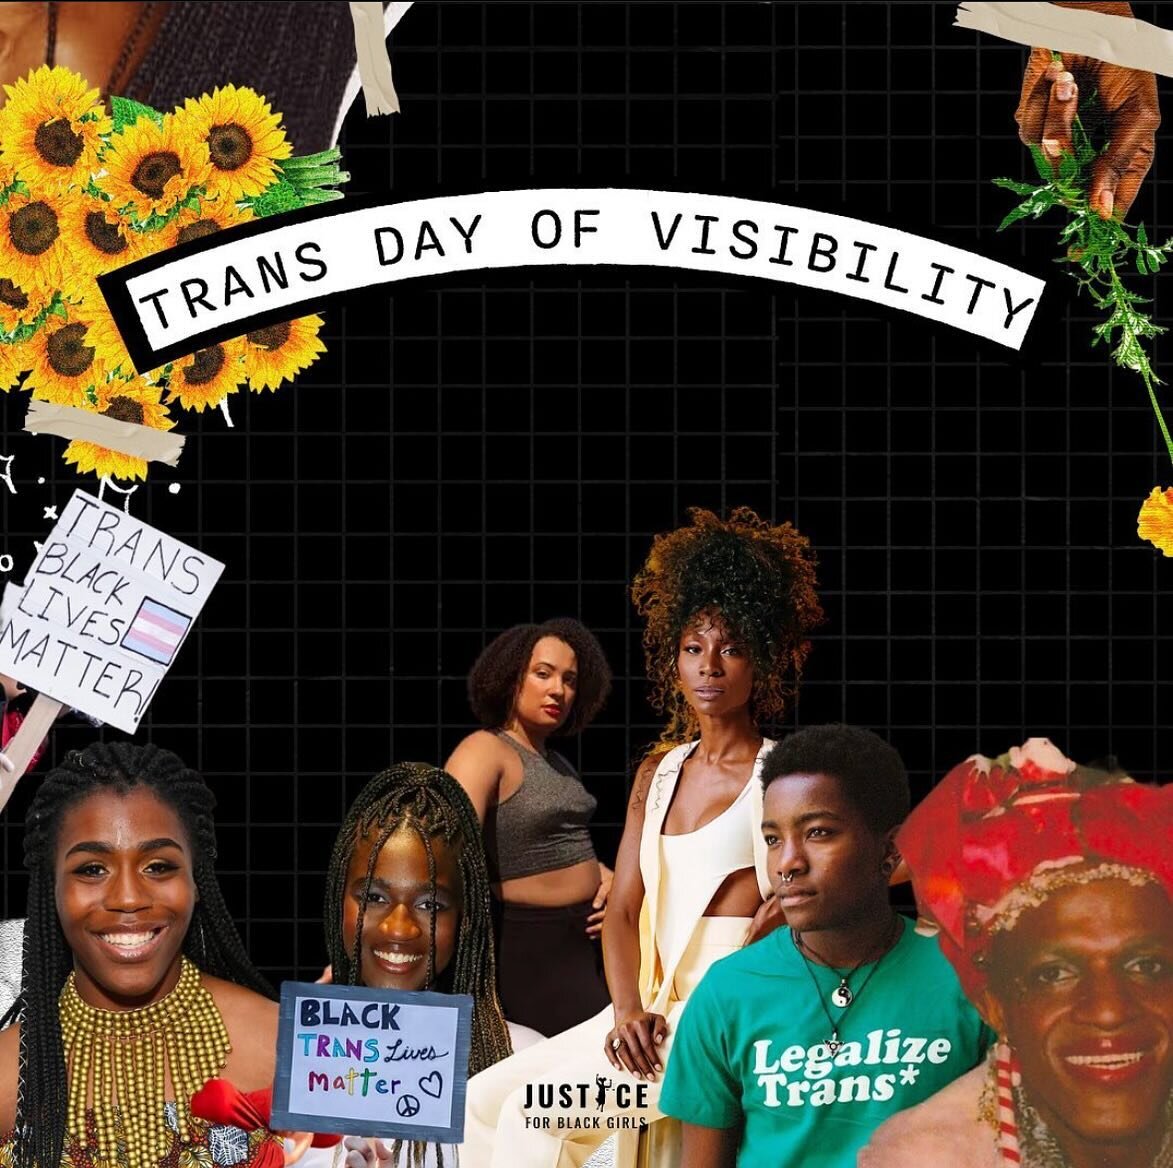 When we say Justice for Black Girls we mean, ALL black girls. Black trans girls are liberated Black girlhood personified. On #transdayofvisibility we amplify the words of Laverne Cox, &ldquo;It is revolutionary for a trans person to choose to be seen